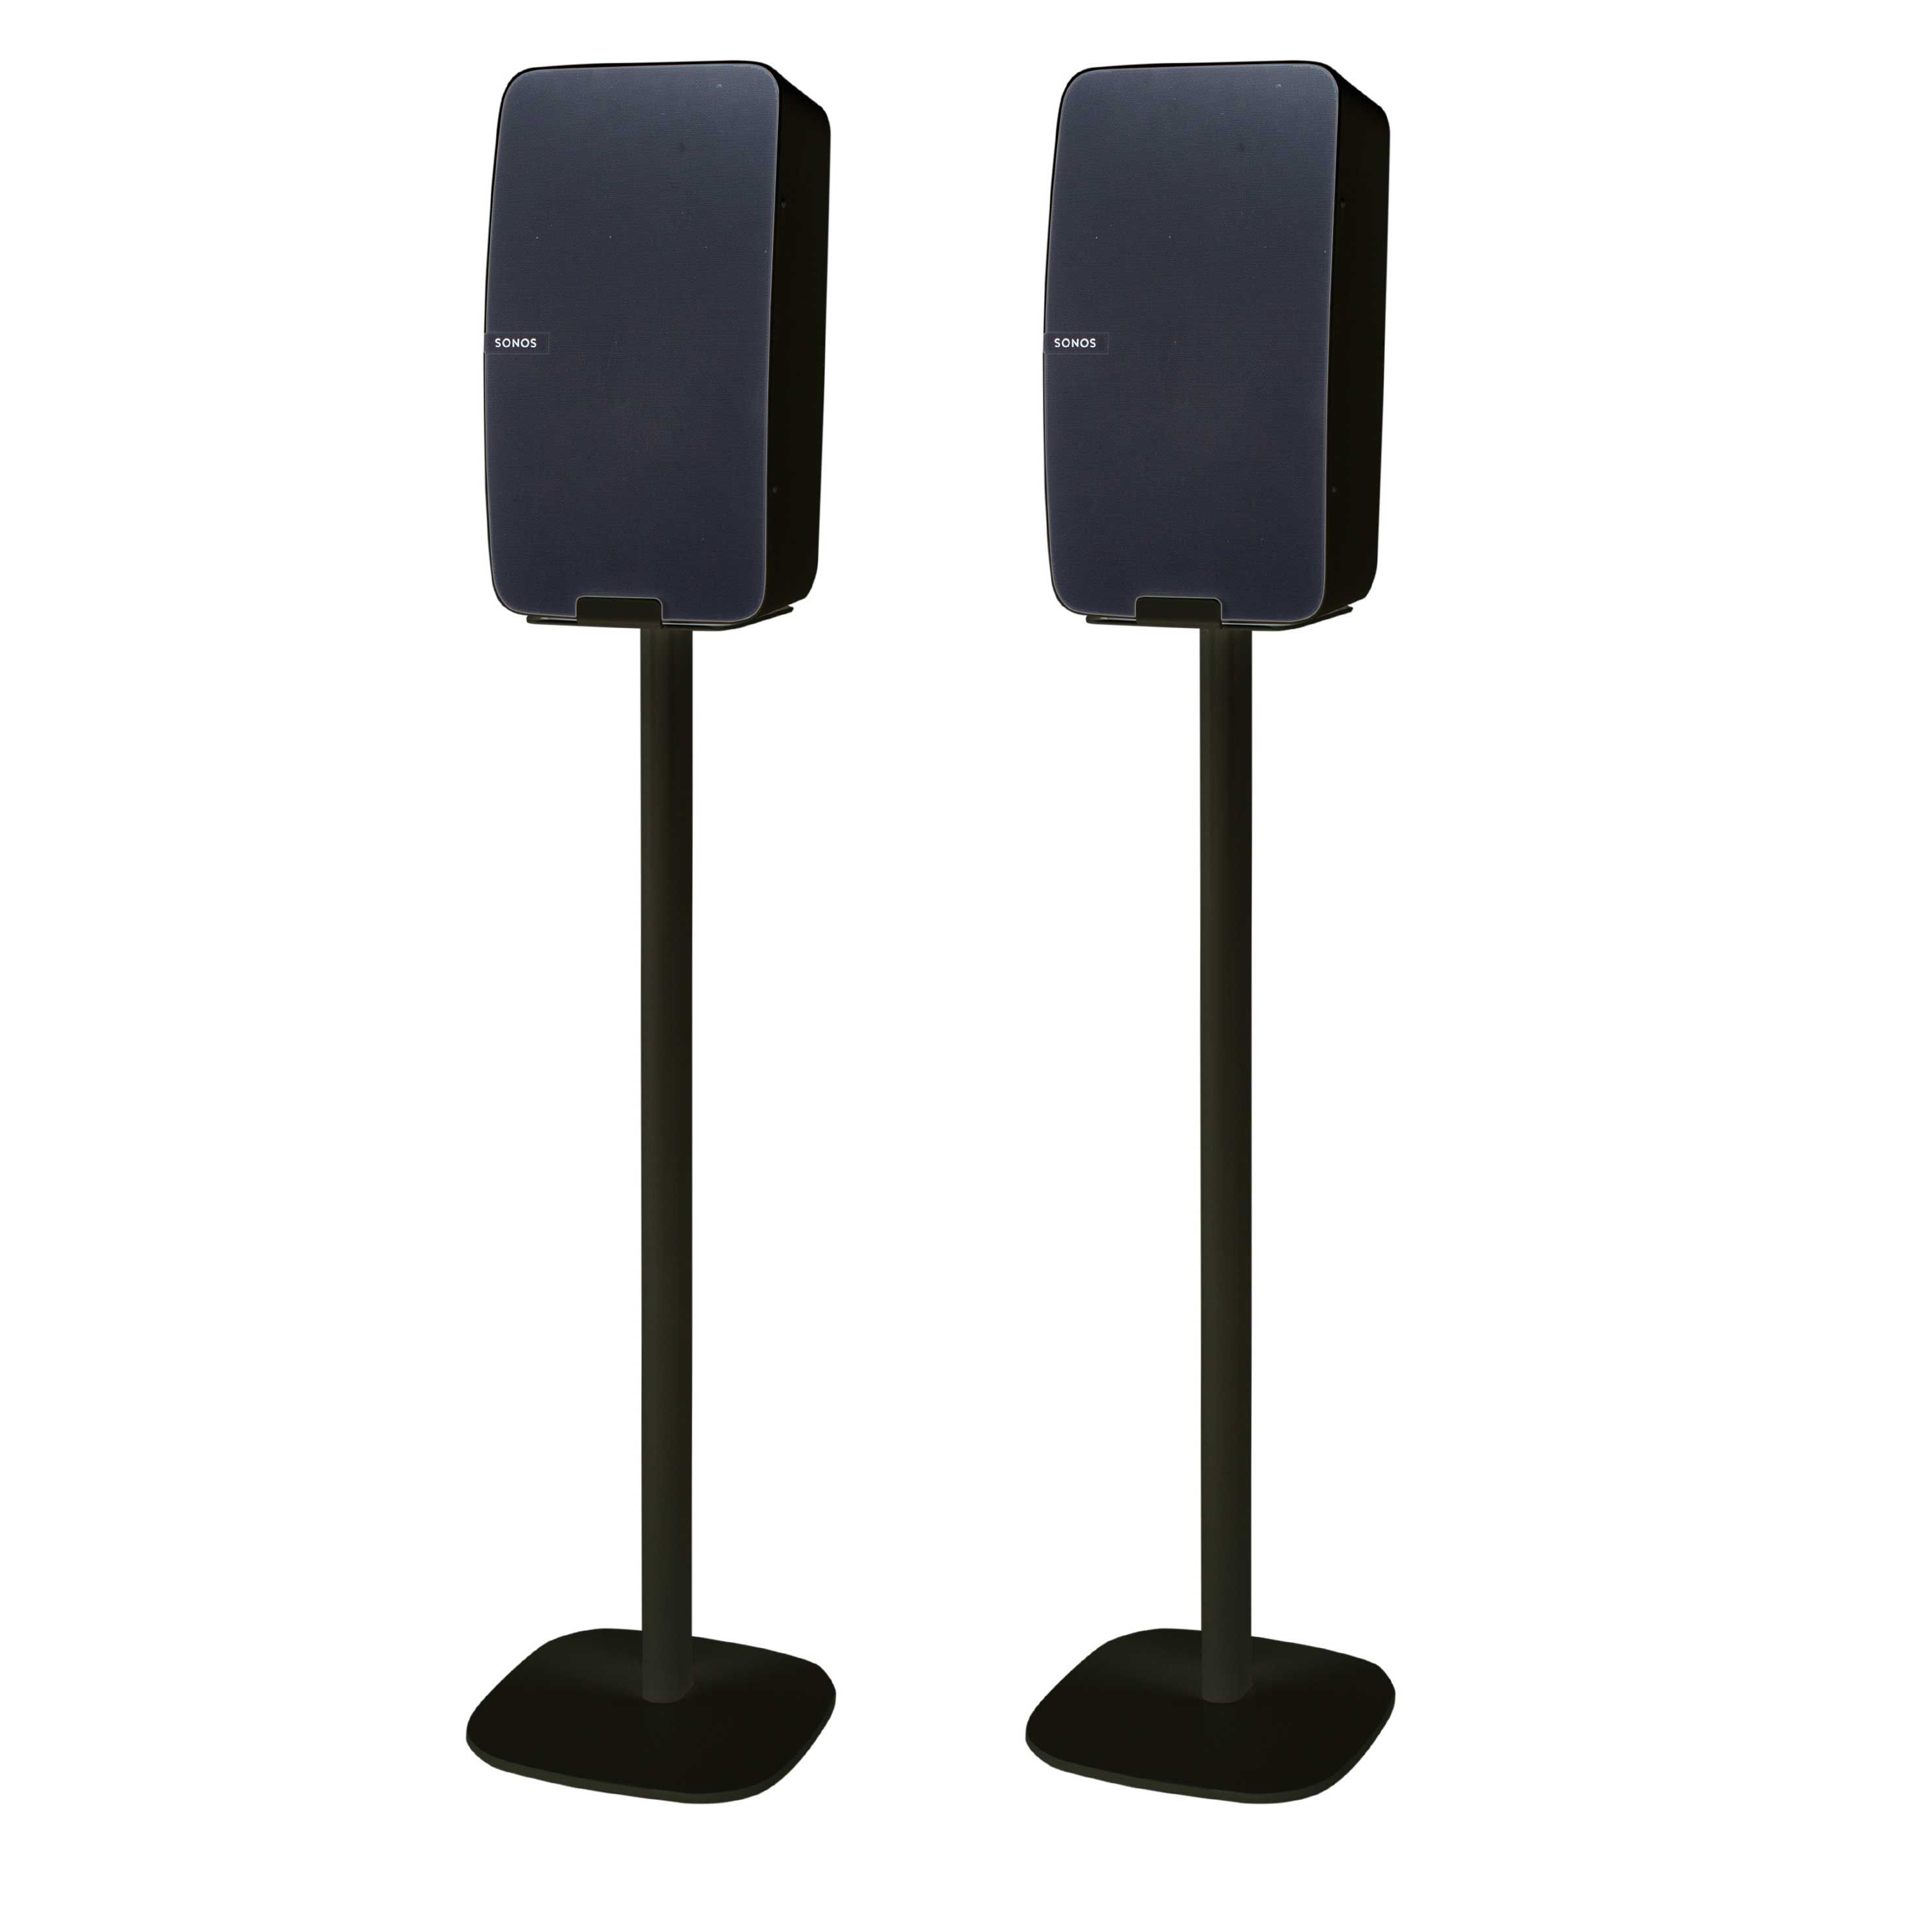 Marco Polo opskrift bang Vebos floor stand Sonos Play 5 black set | The floor stand for Sonos Play:5  gen 2